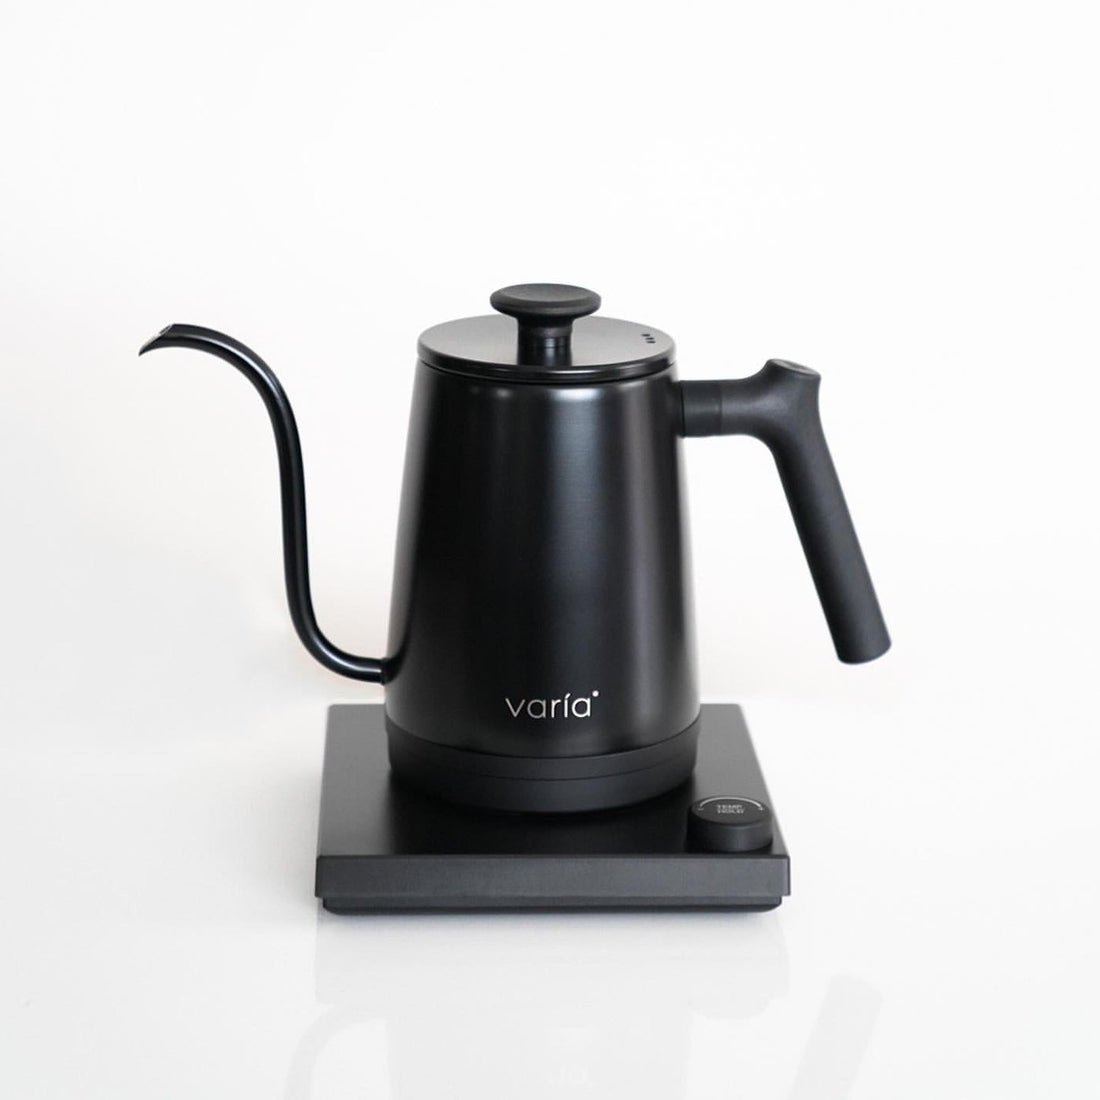 Miroco Electric Kettle Review